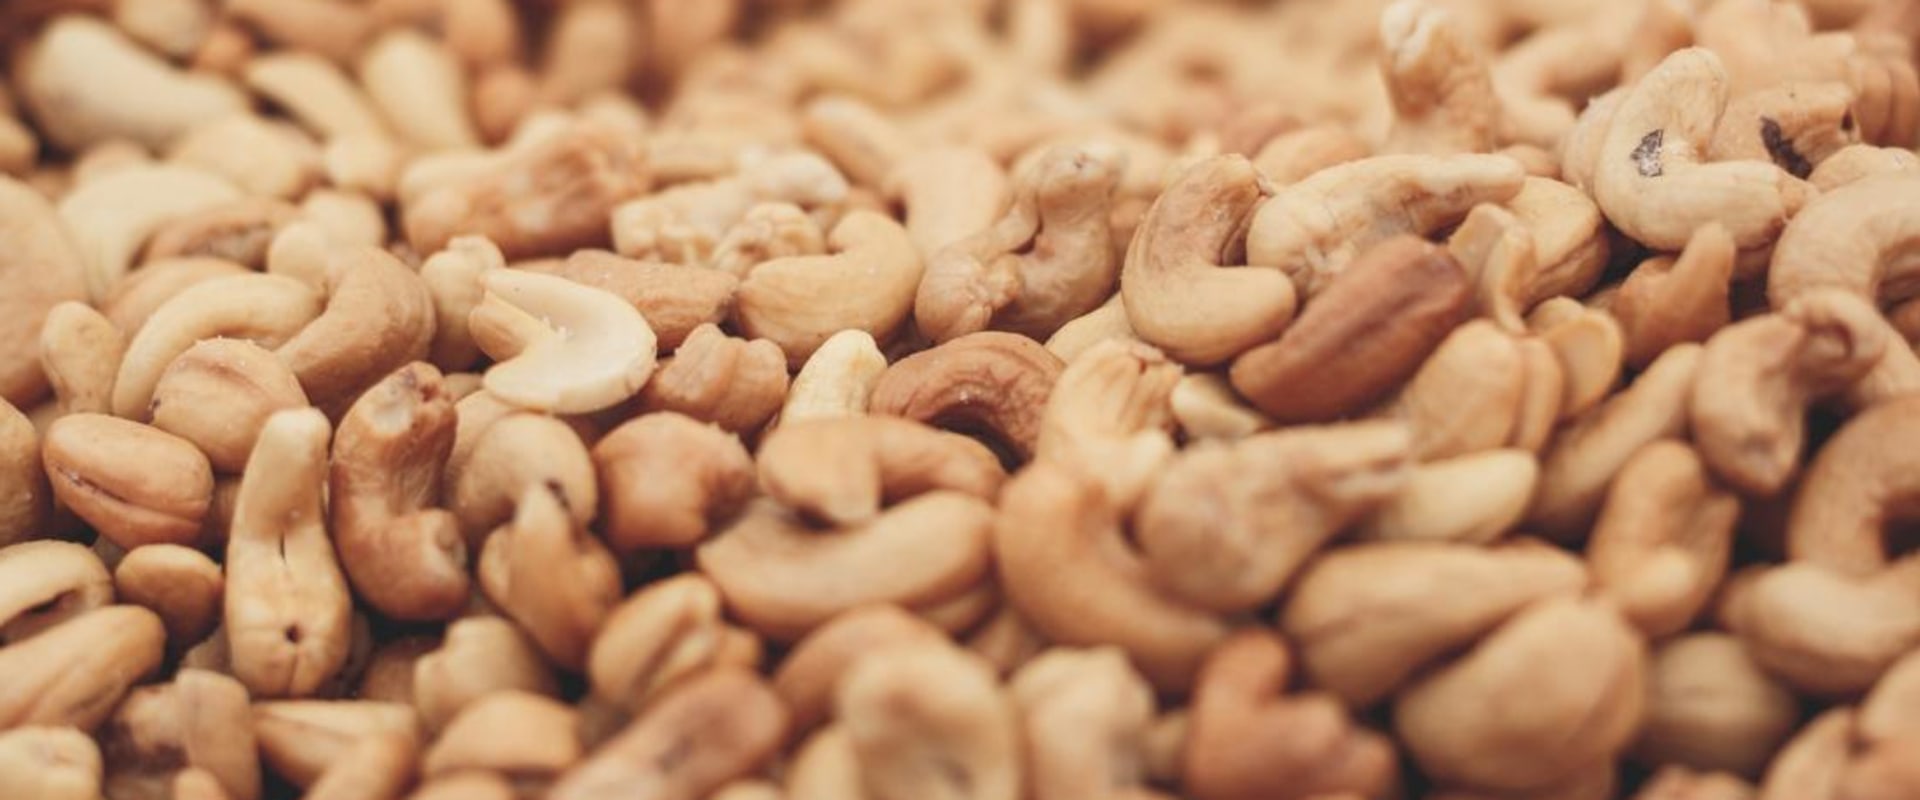 How much cashew can i eat a day?